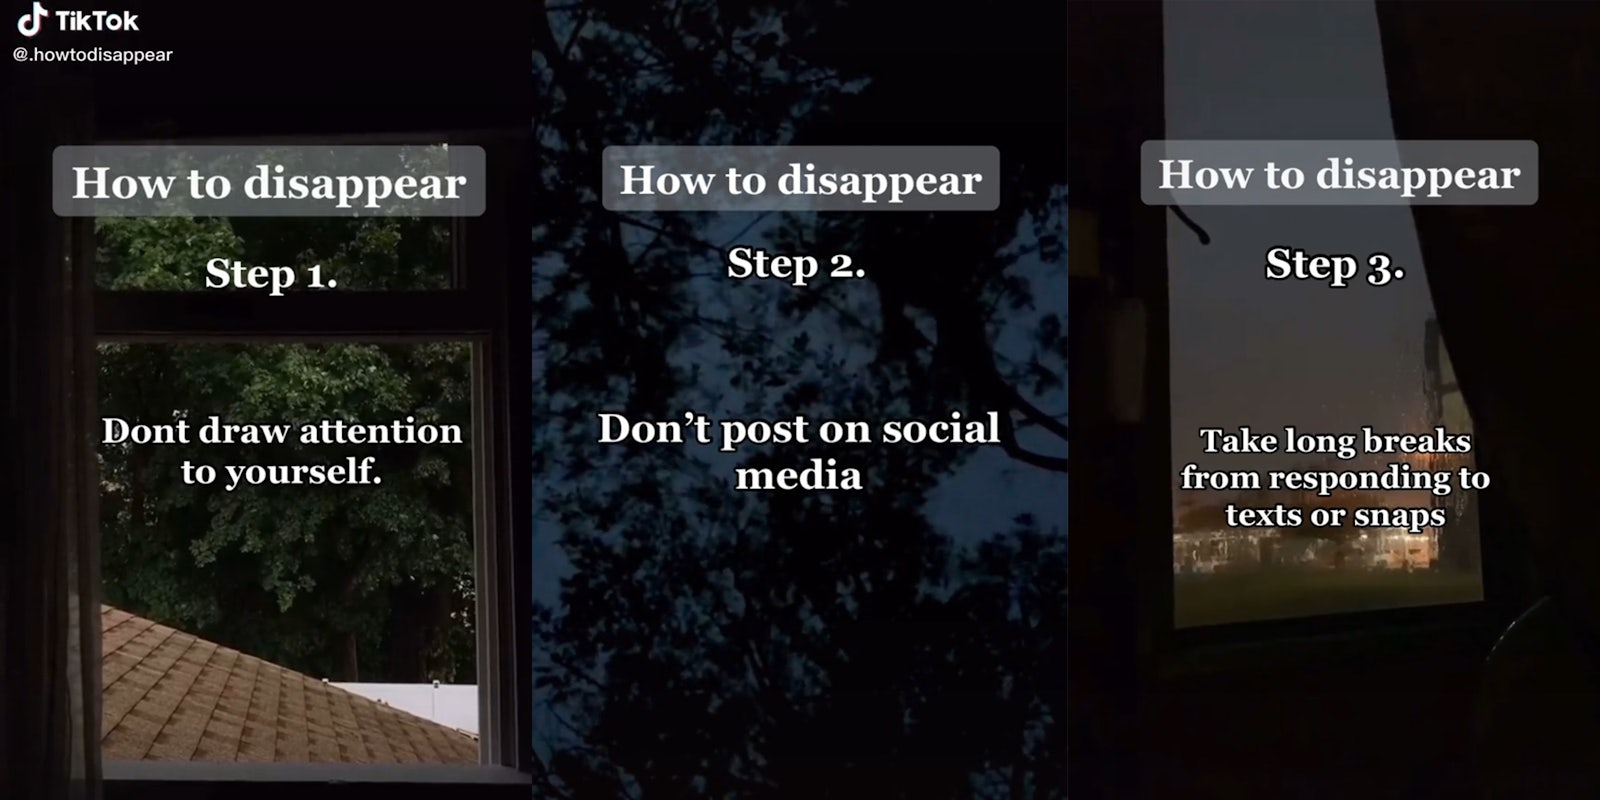 'How to disappear' TikToks, Step 1. Don't draw attention to yourself (l) Step 2. Don't post on social media (c) Step 3. Take long breaks from responding to texts or snaps (r)